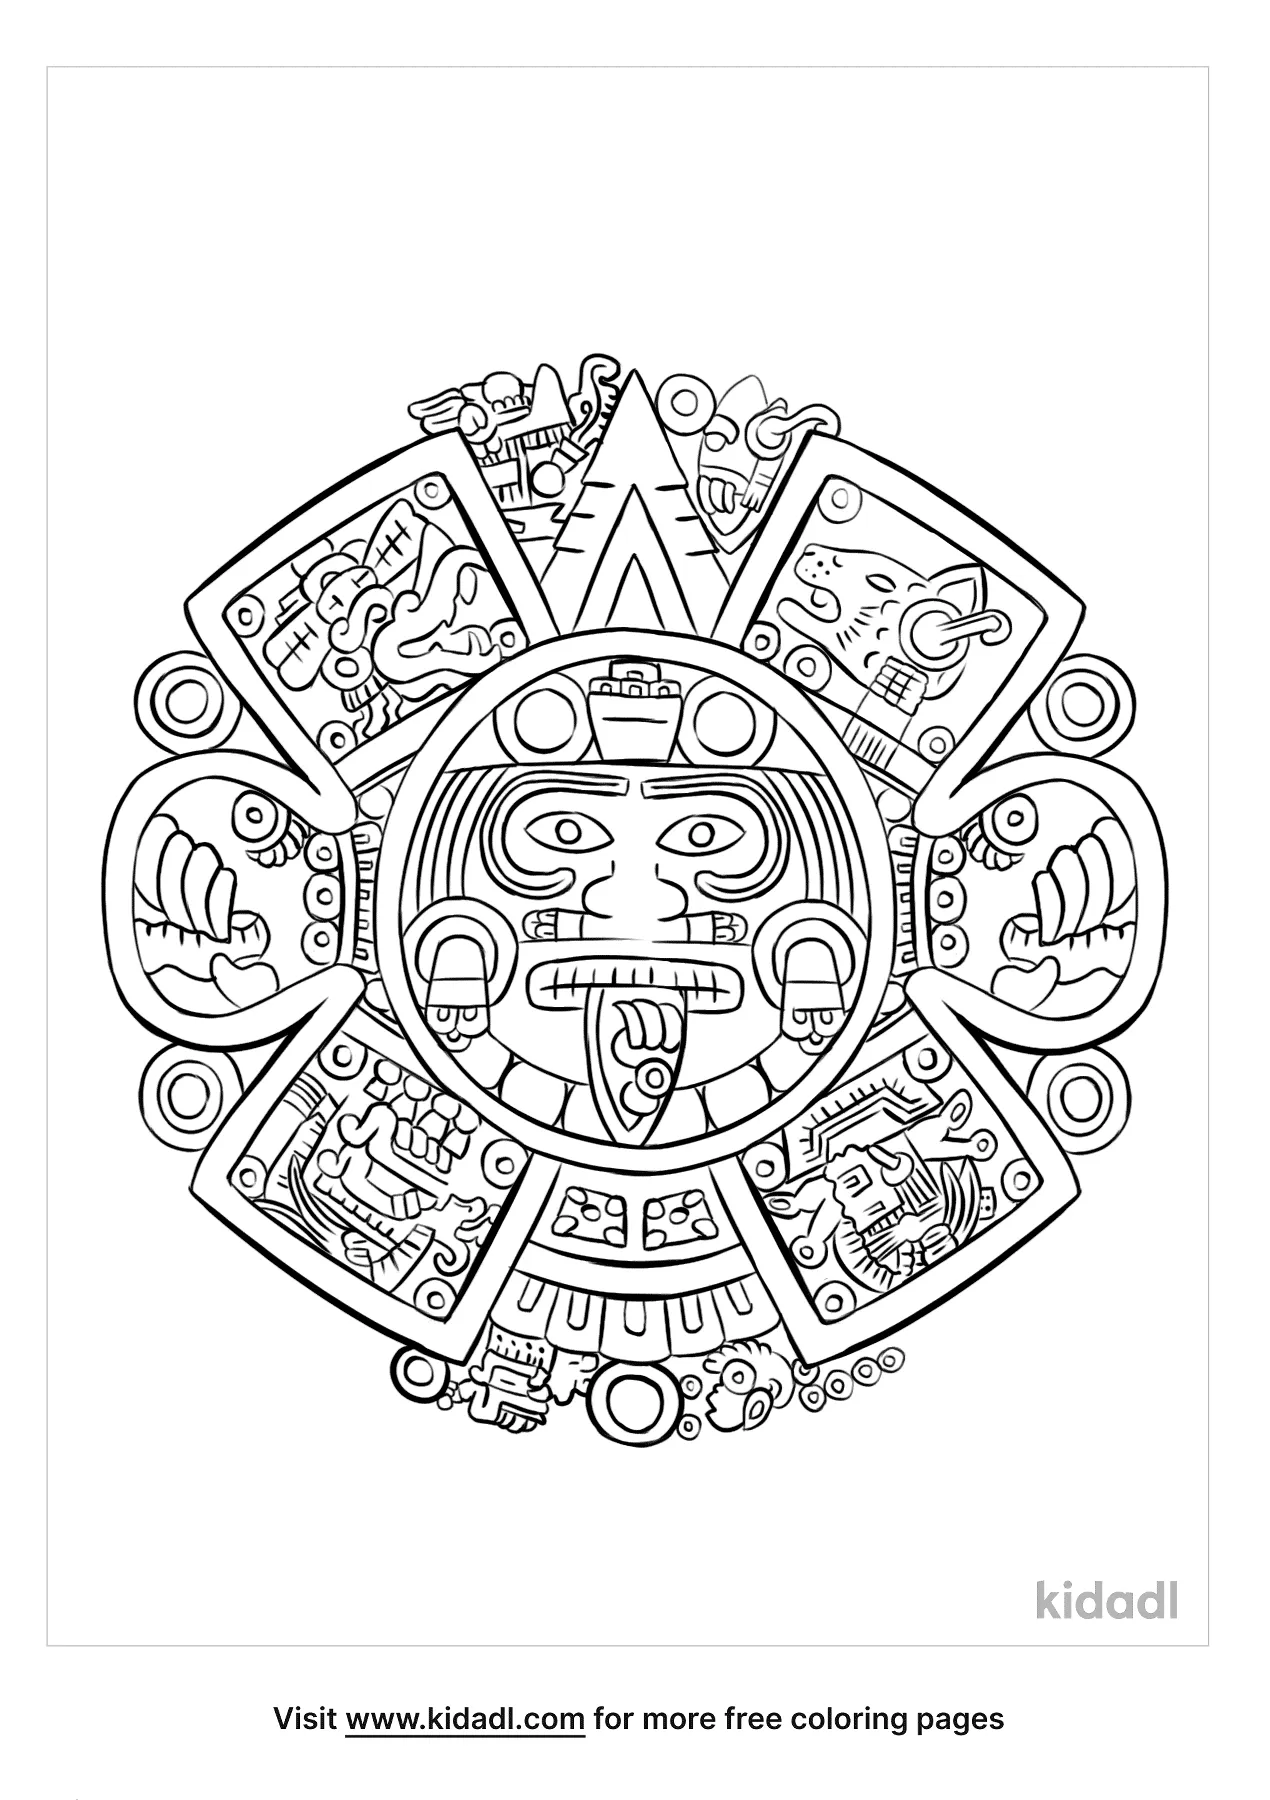 Aztec Calendar Coloring Pages   Free History Coloring Pages   Kidadl